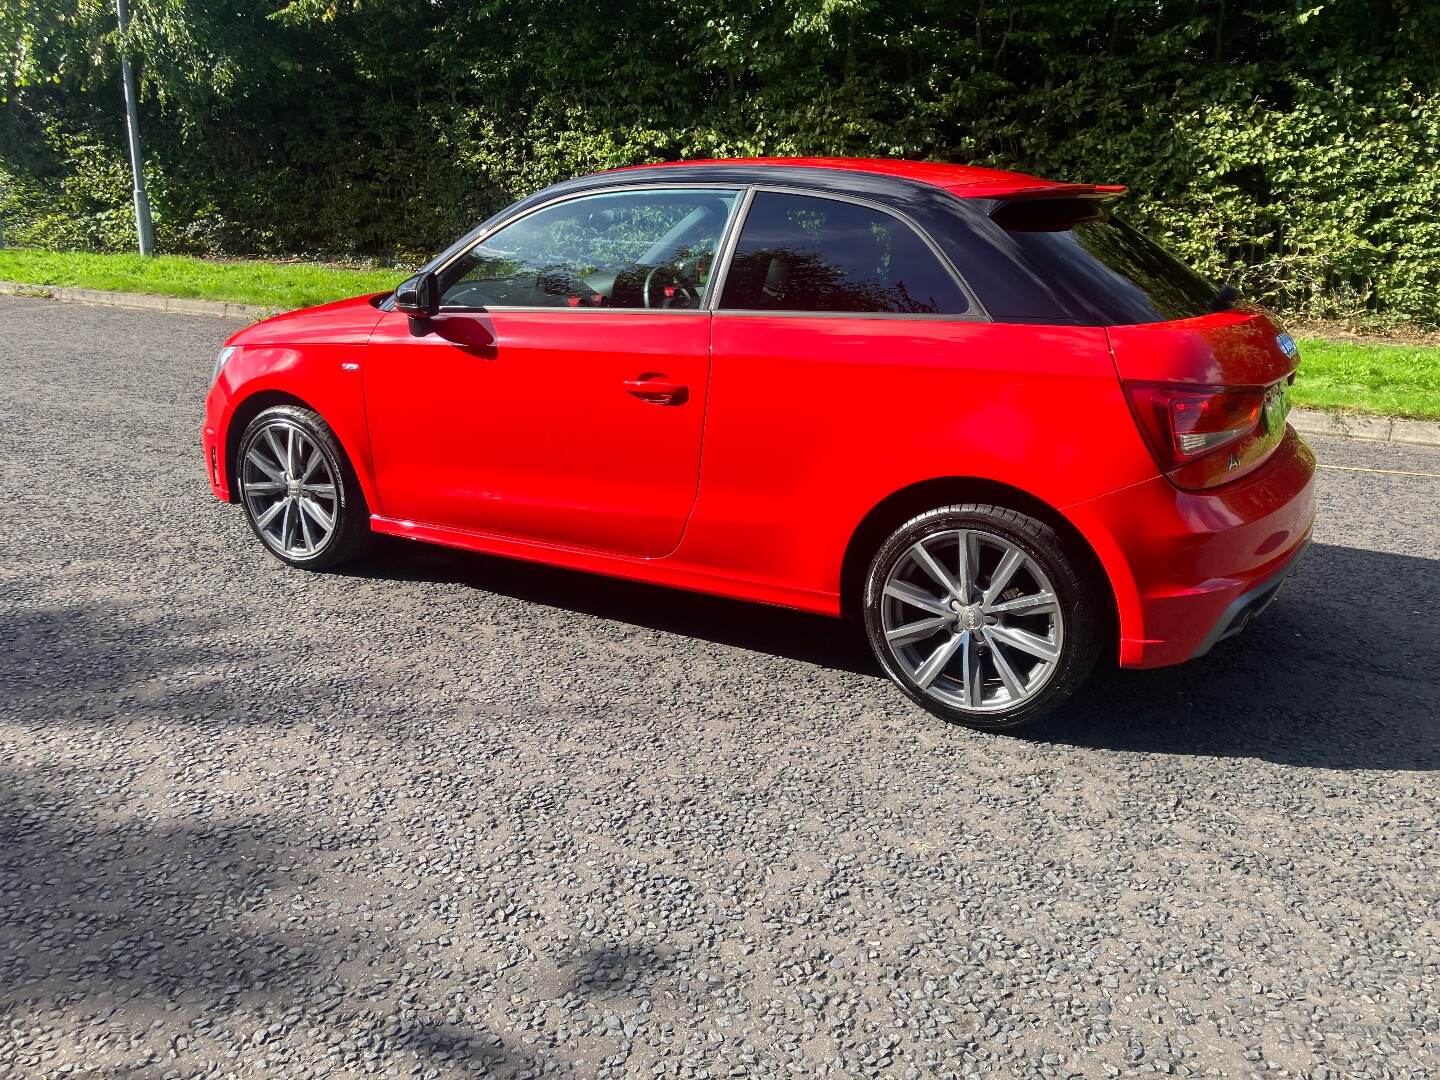 Audi A1 HATCHBACK SPECIAL EDITIONS in Down